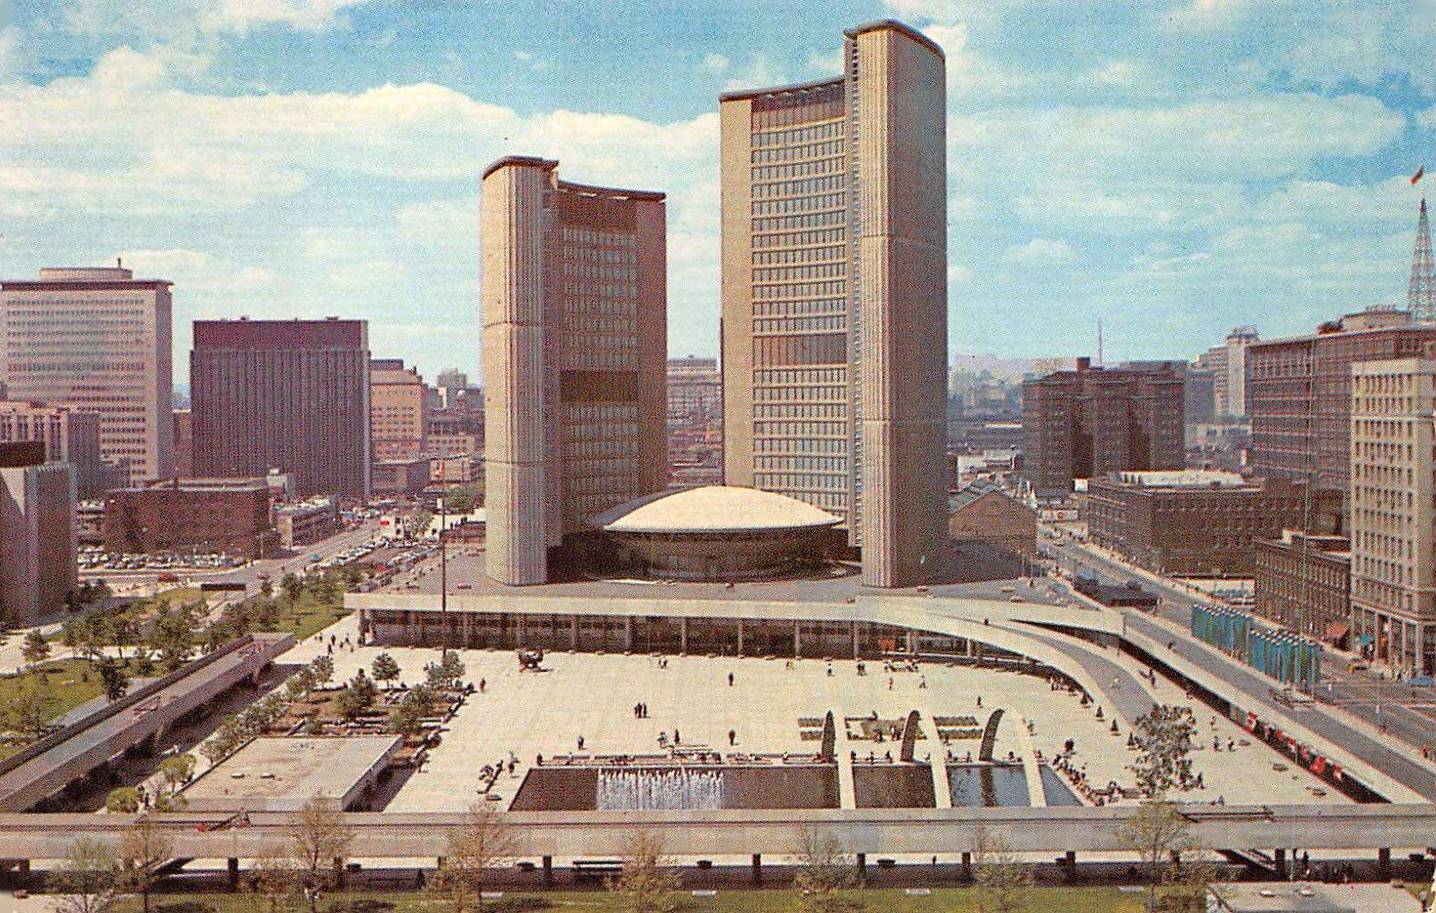 xx postcard - toronto - nathan phillips square and new city hall - aerial from across queen - maybe c1970